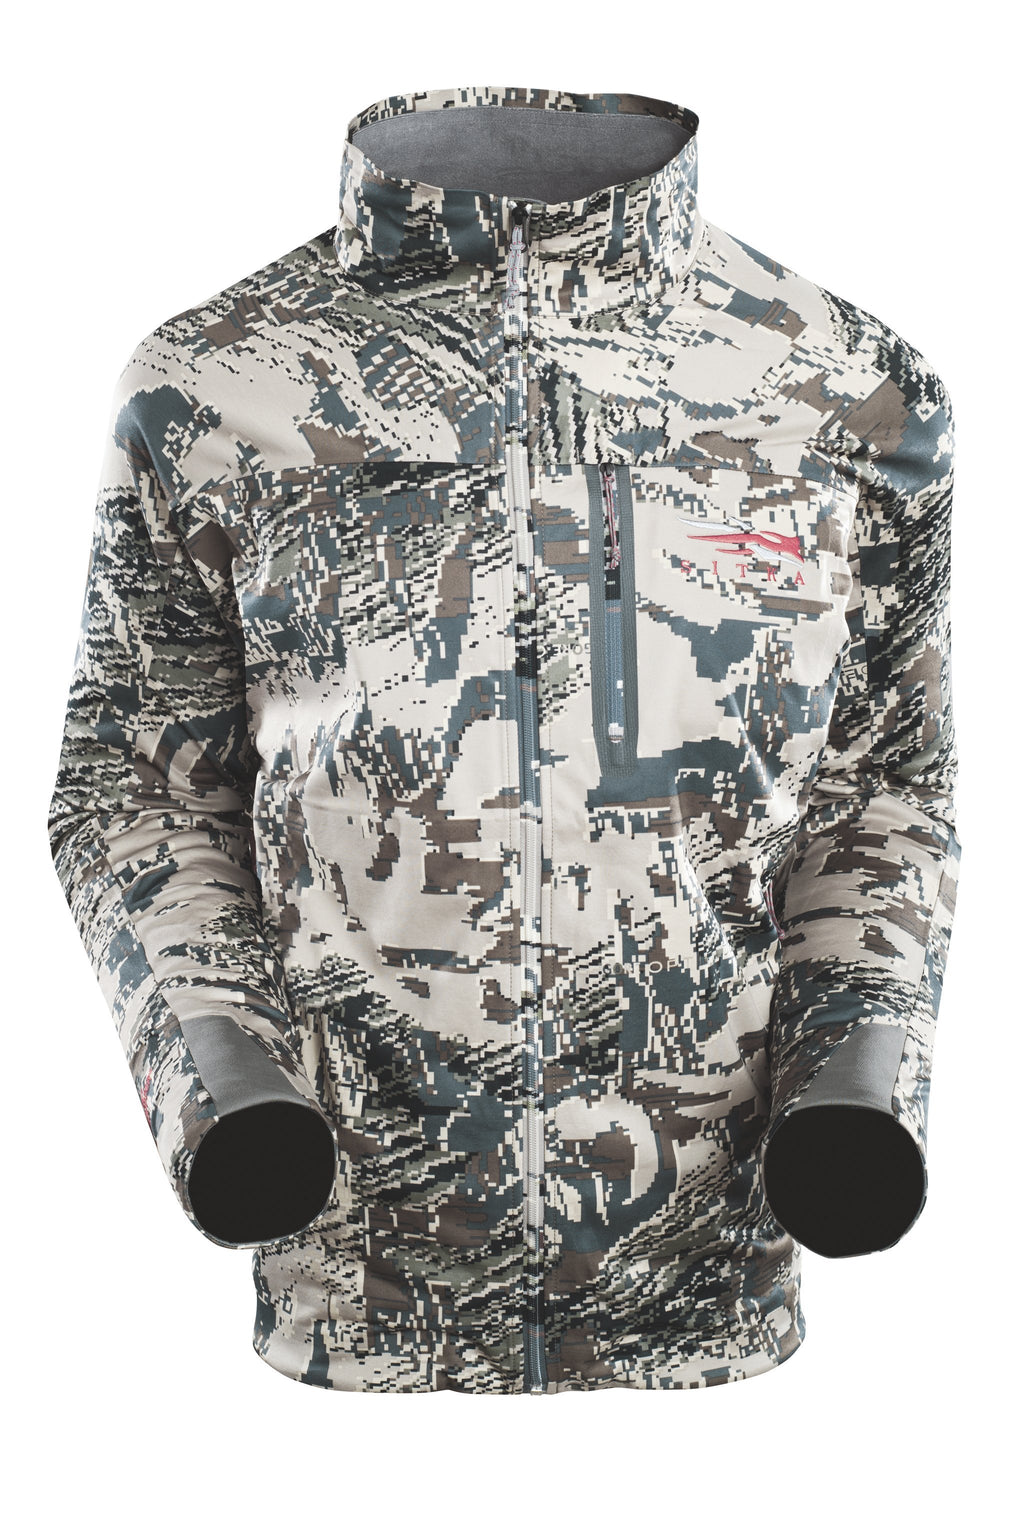 Sitka Mountain Jacket- Close Out